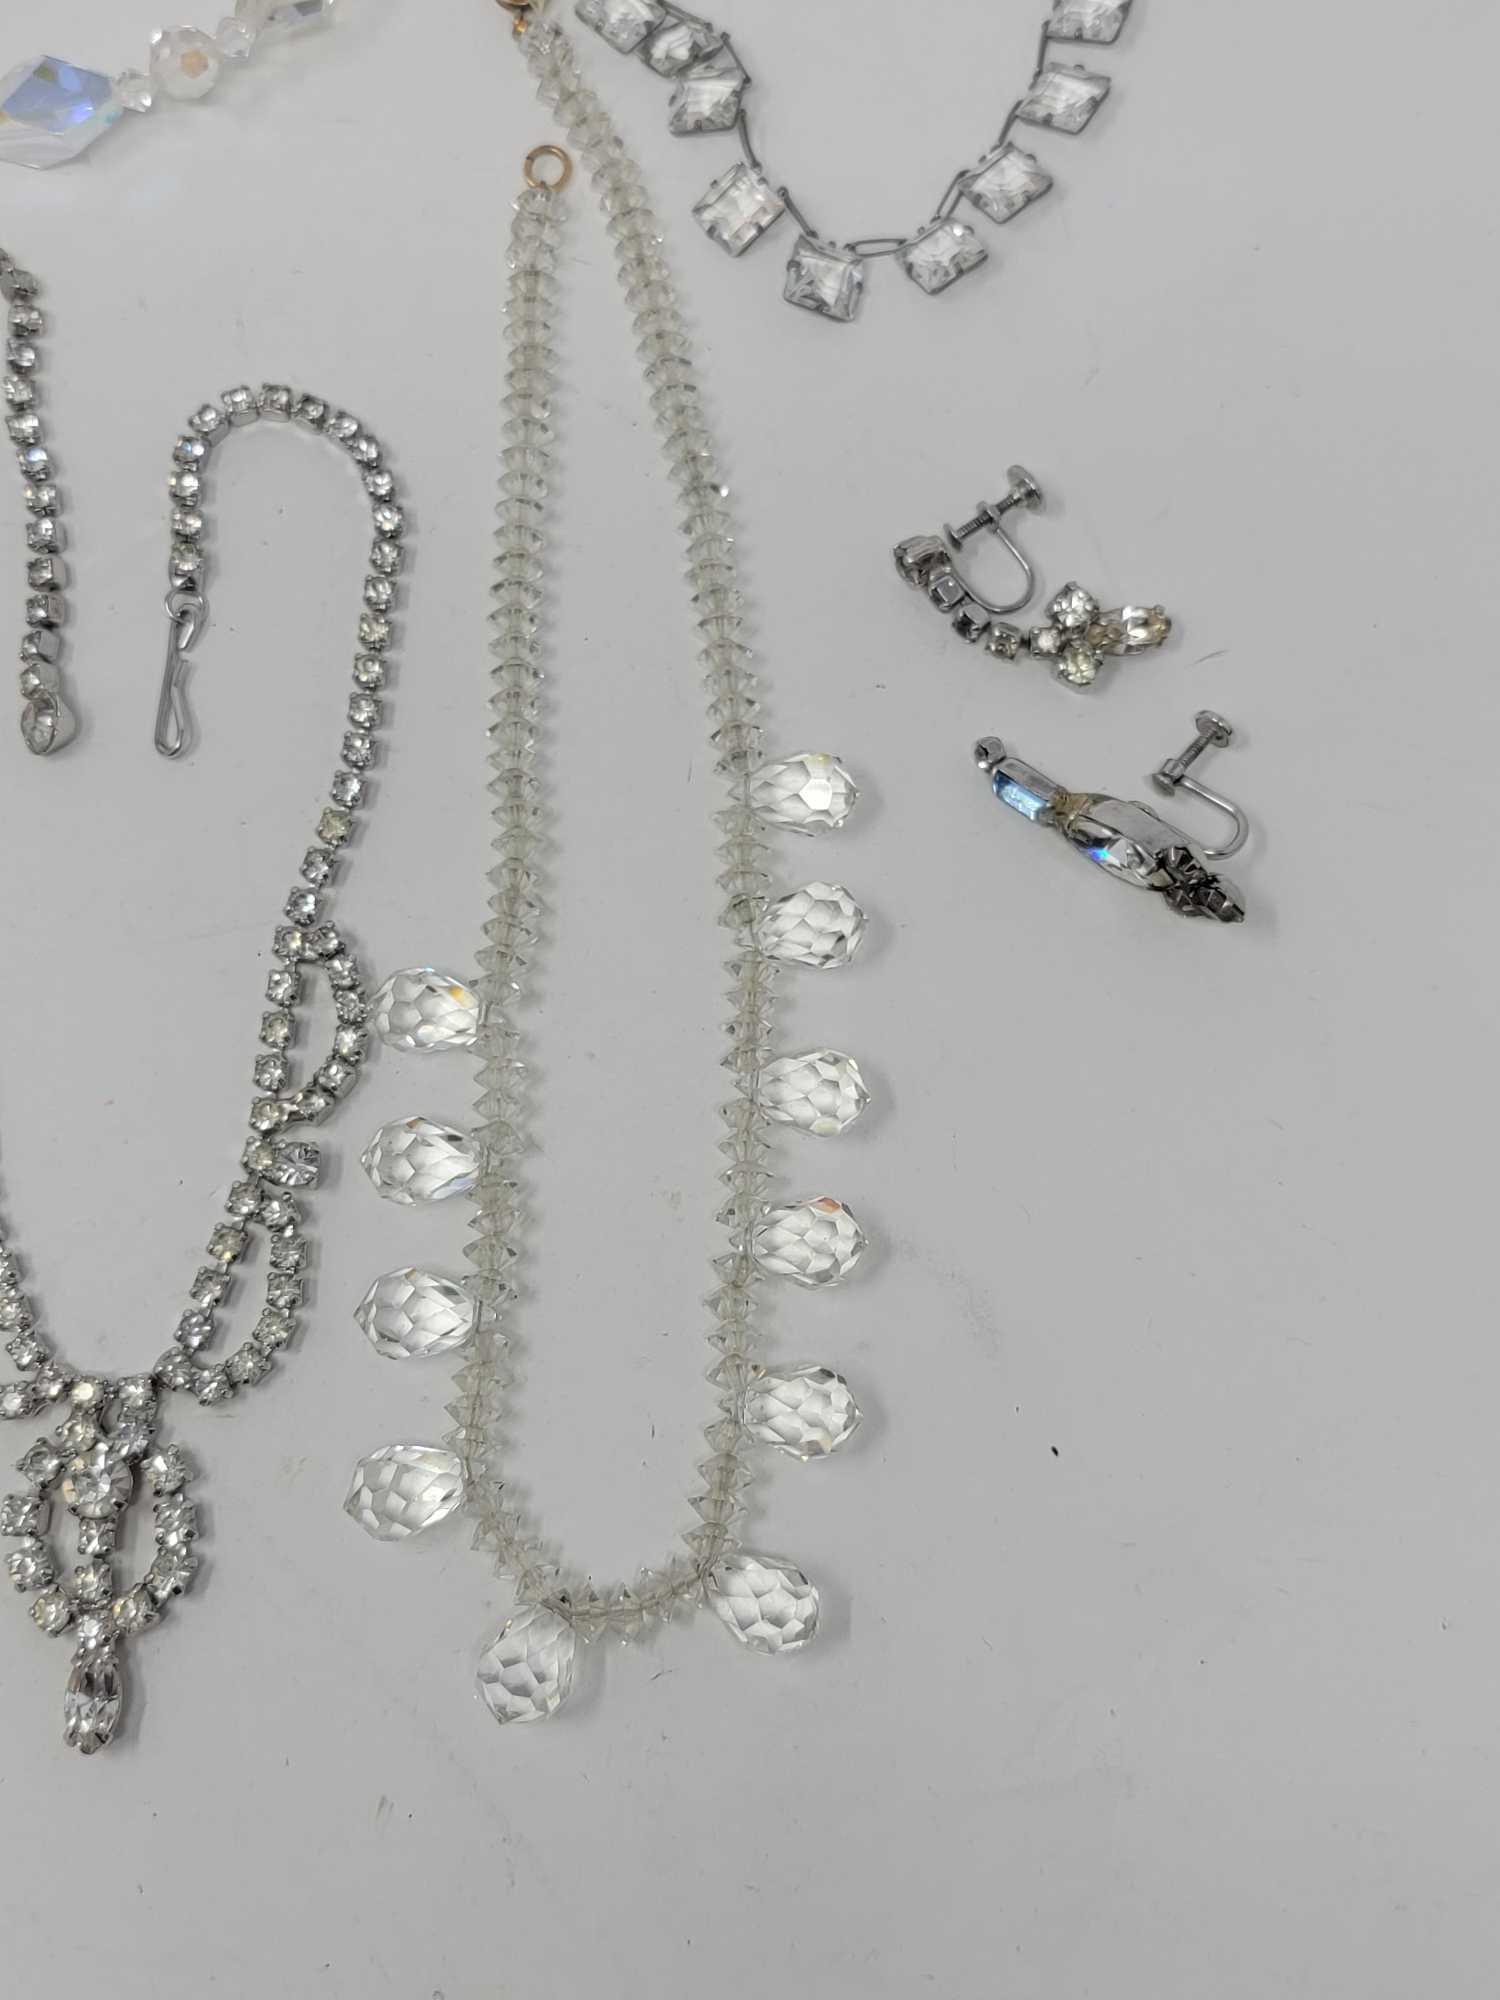 Grouping of Rhinestone and Crystal Jewelry